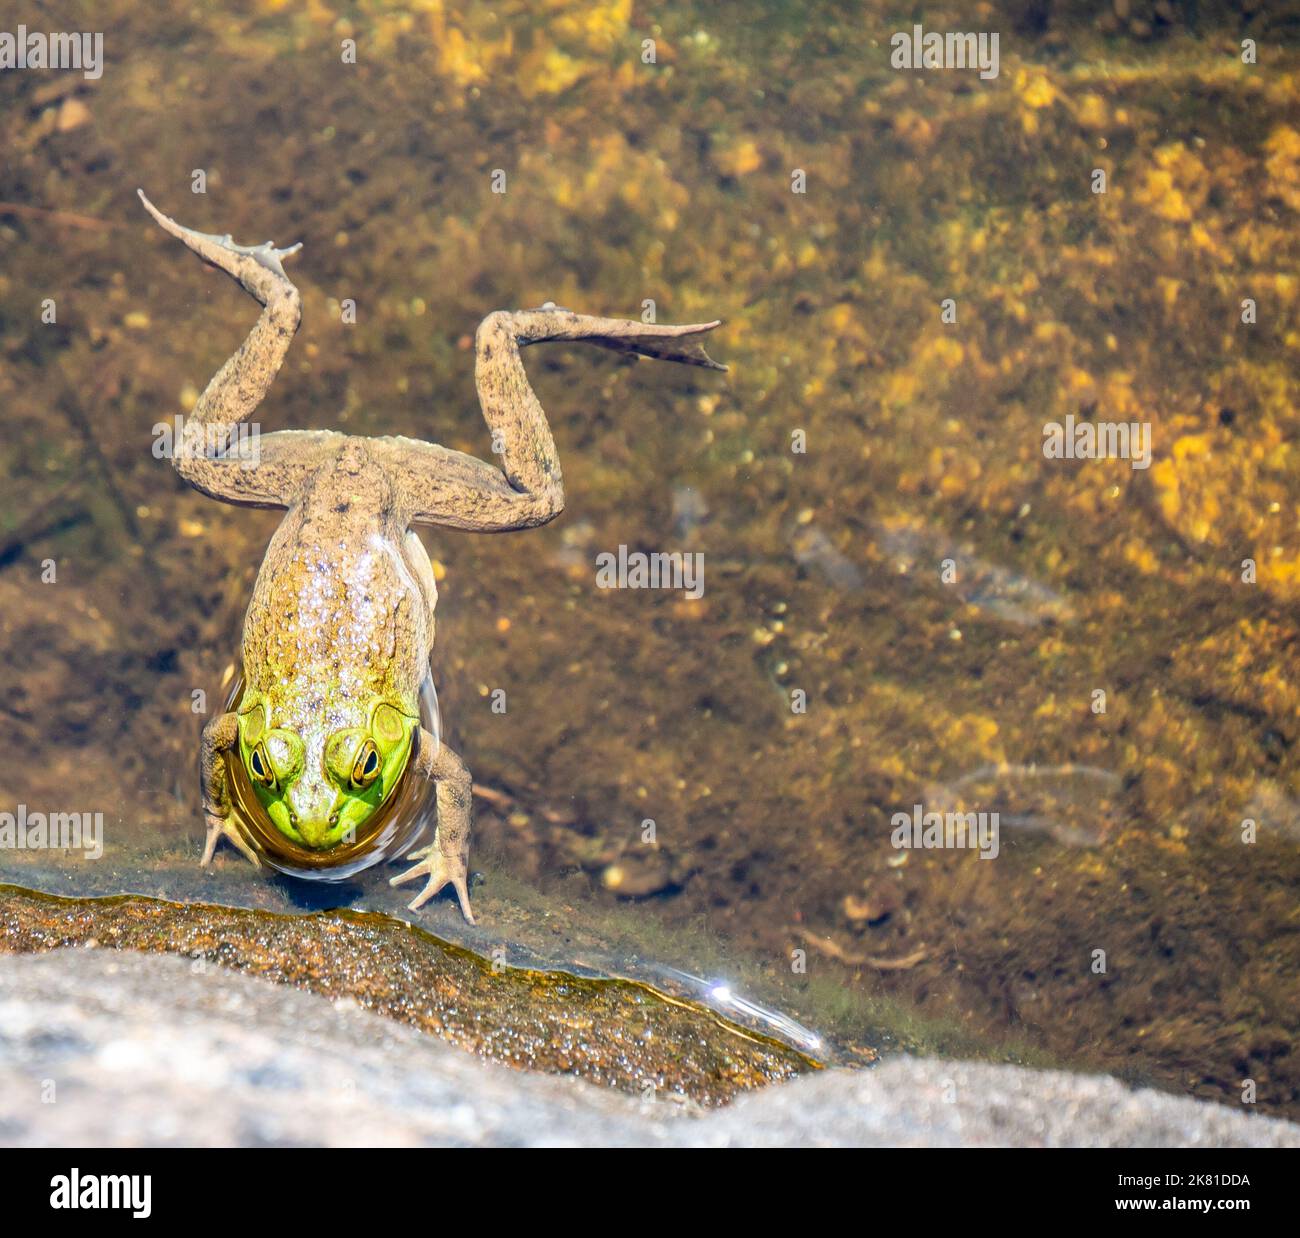 Close-up of a frog floating on the surface of the water. High Falls, Algonquin Provincial Park. Stock Photo